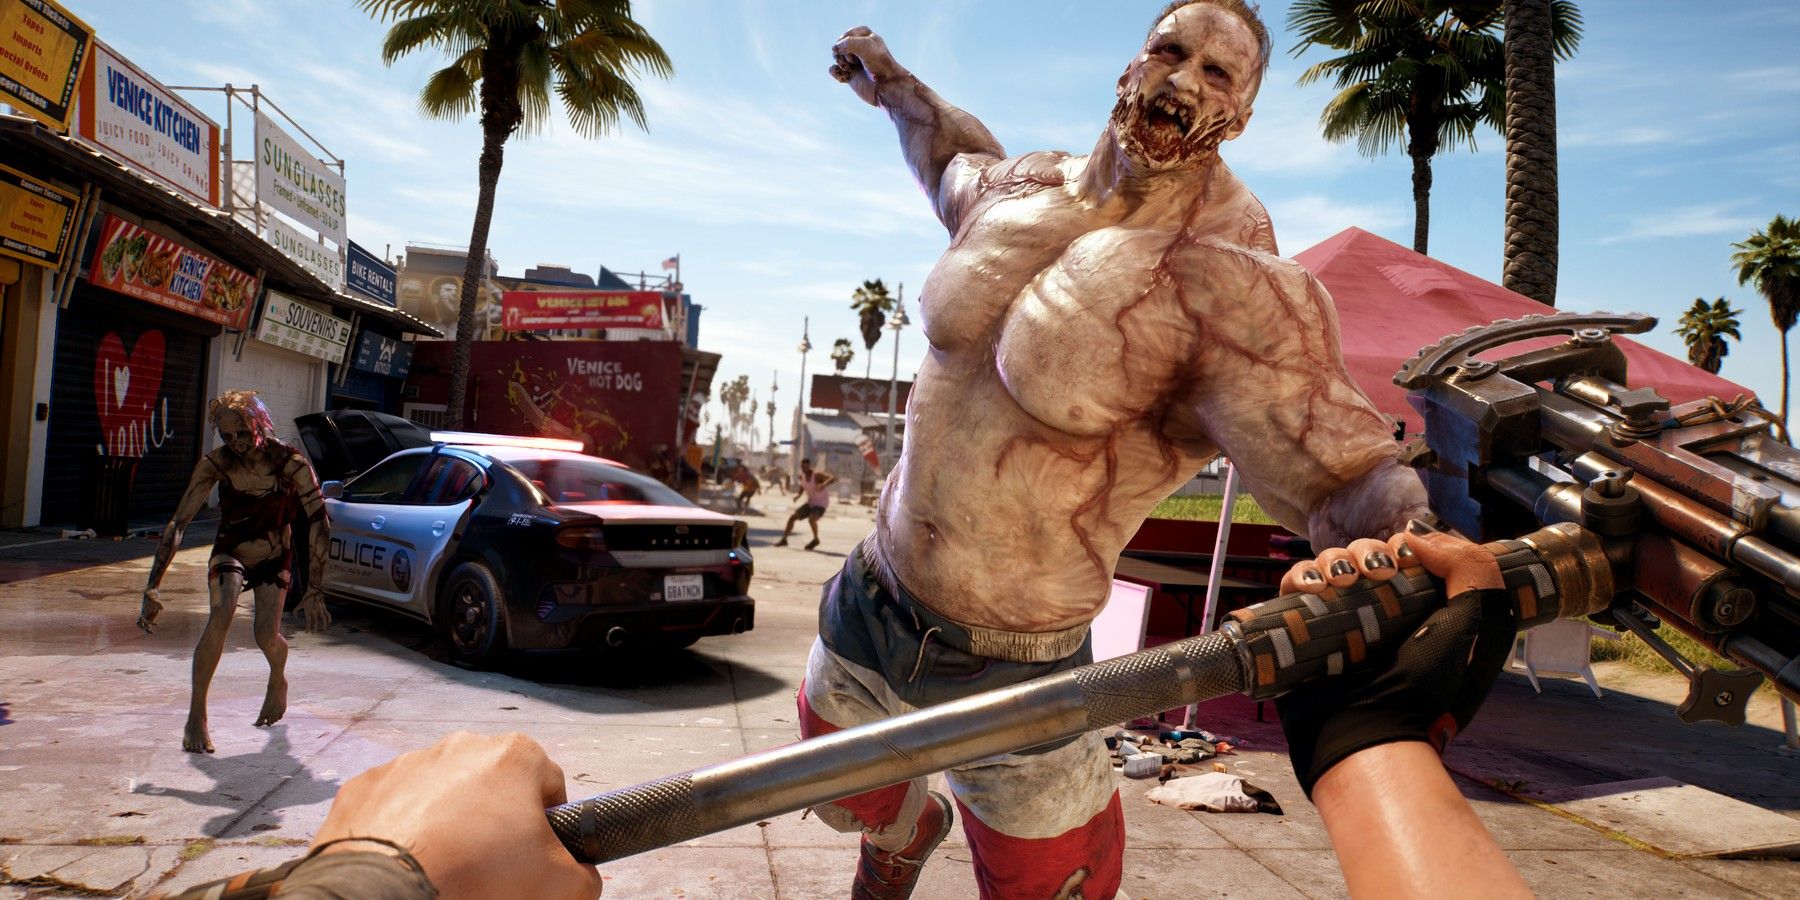 Dead Island 2 Shows Any Game Can Survive Development Hell